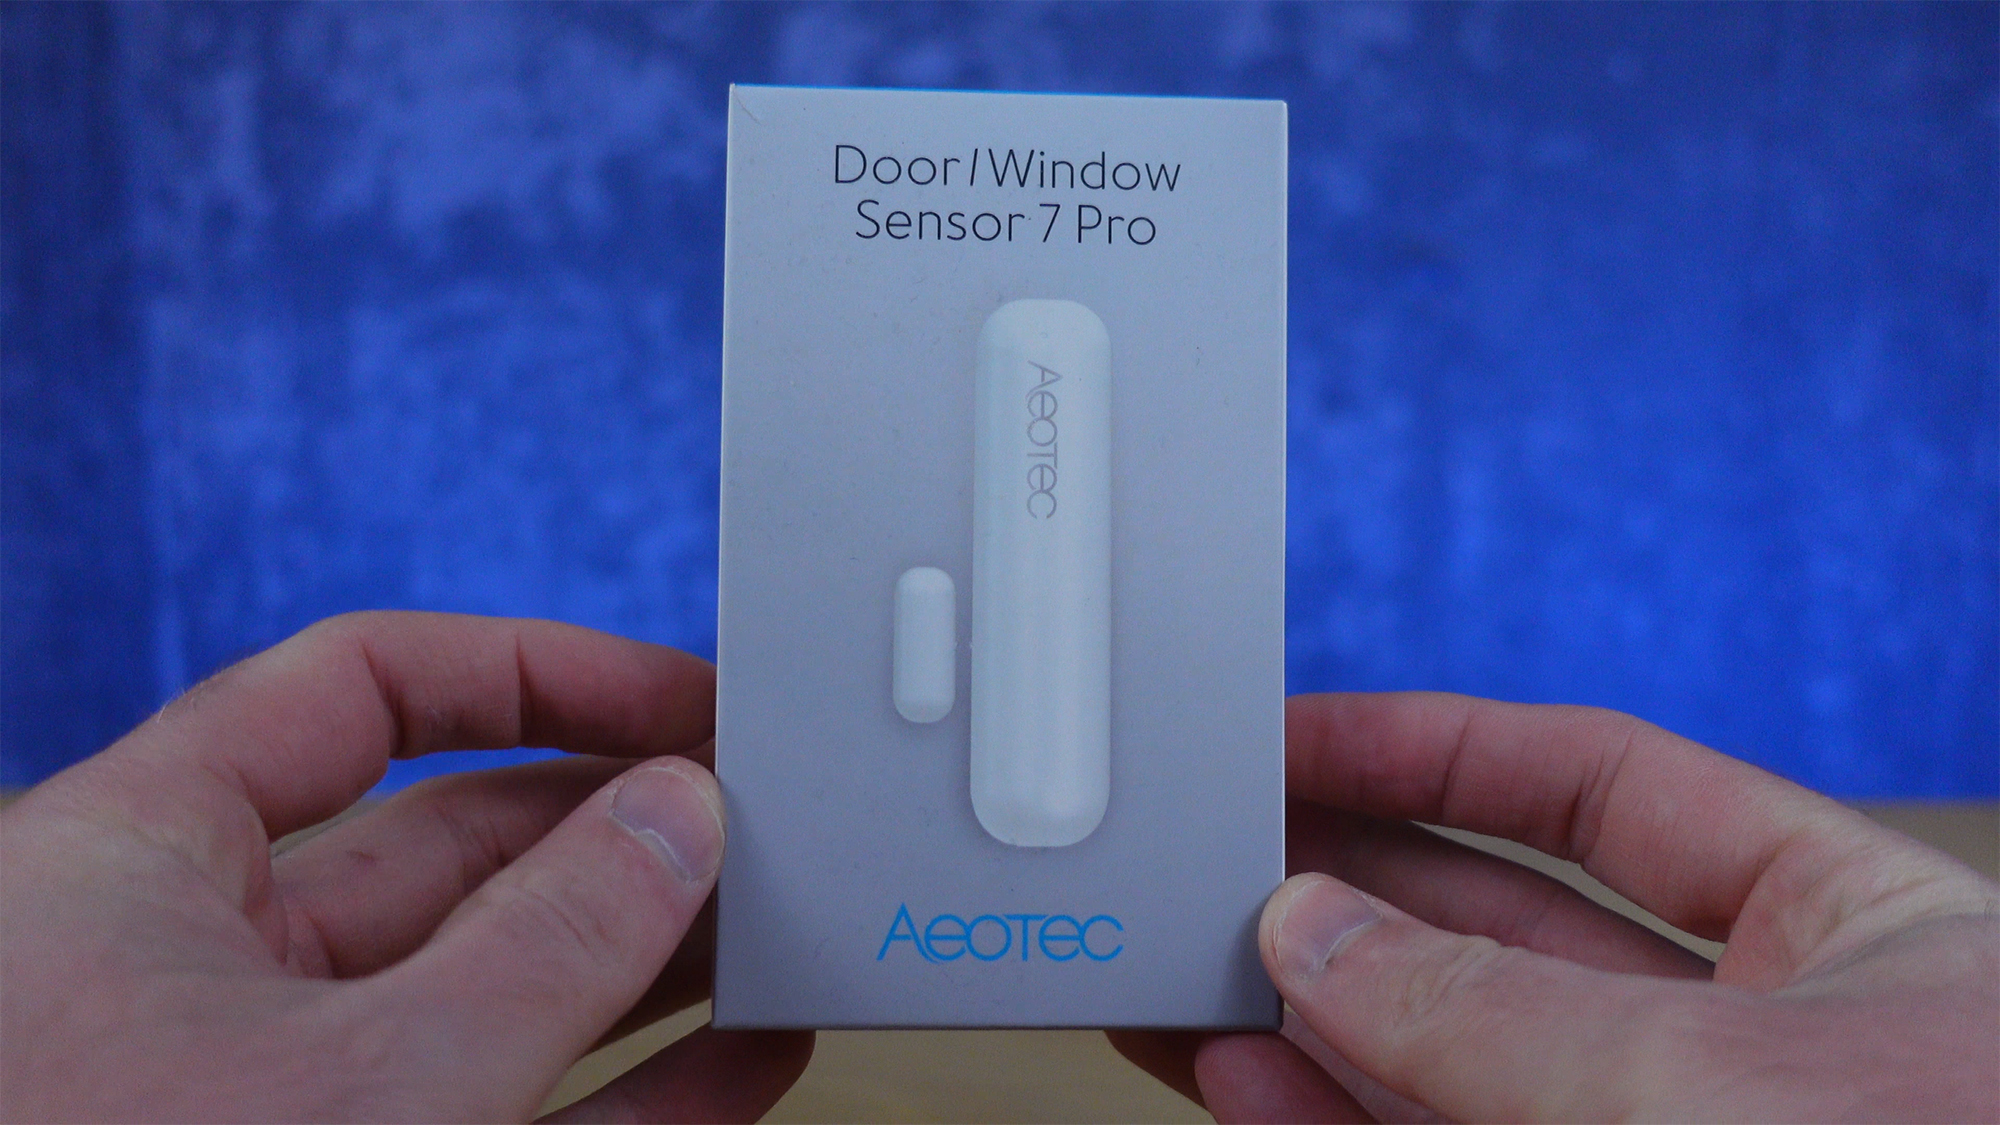 How to Get The Aeotec Door/Window Sensor Basic/Pro 7 Working With Its Dry Contacts